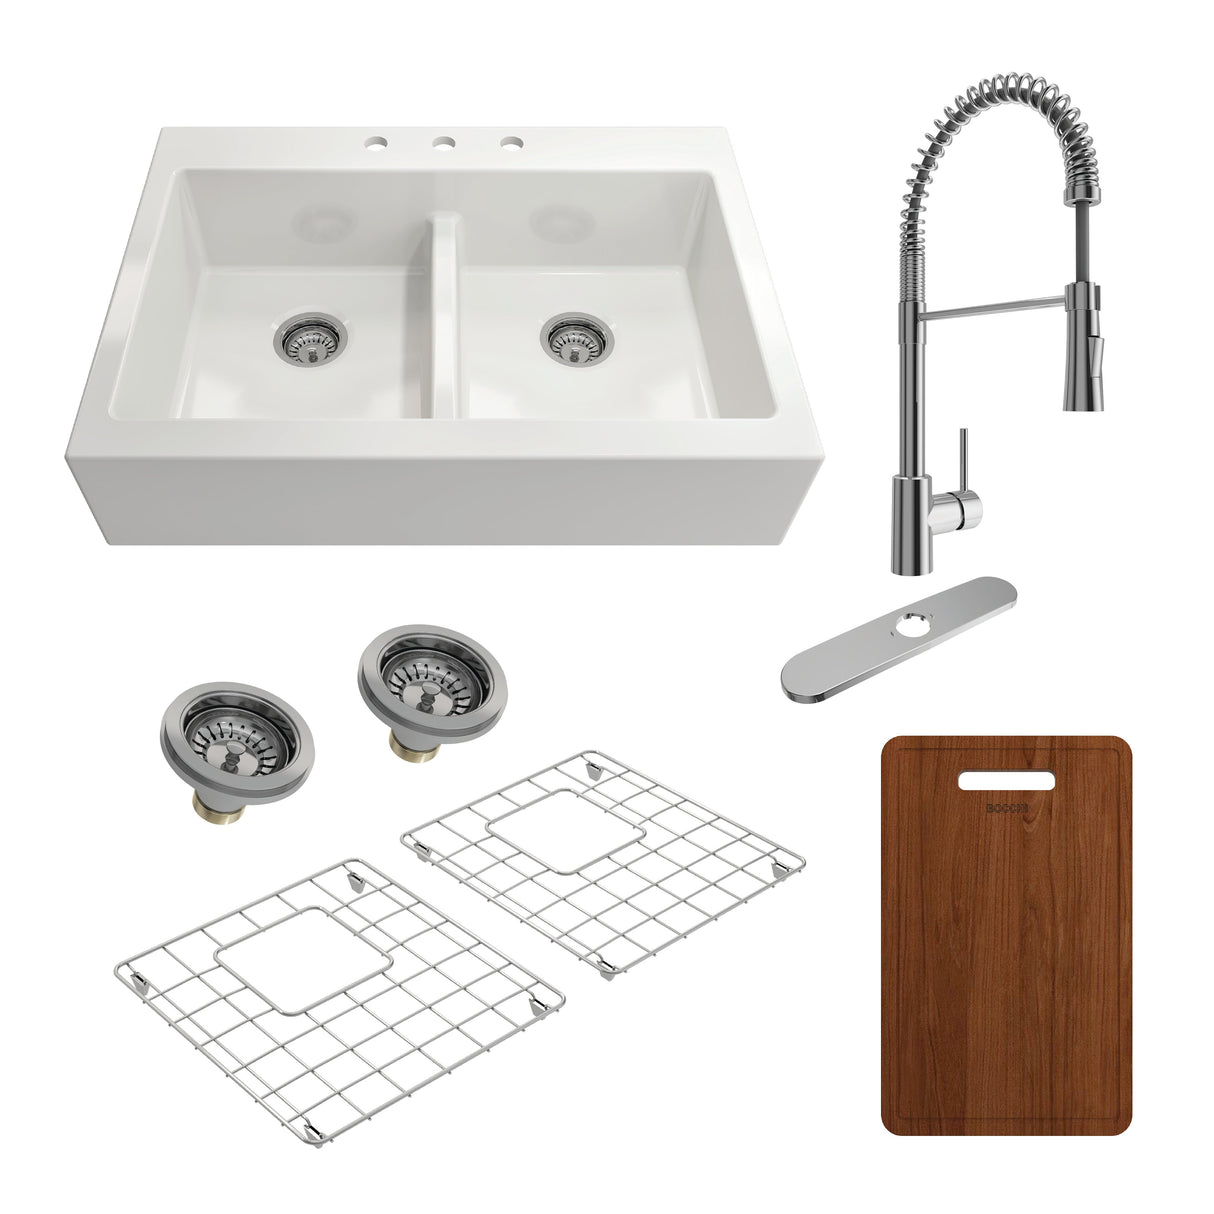 BOCCHI 1501-001-2020CH Kit: 1501 Nuova Apron Front Drop-In Fireclay 34 in. 50/50 Double Bowl Kitchen Sink with Protective Bottom Grids and Strainers & Cutting Board w/ Livenza 2.0 Faucet